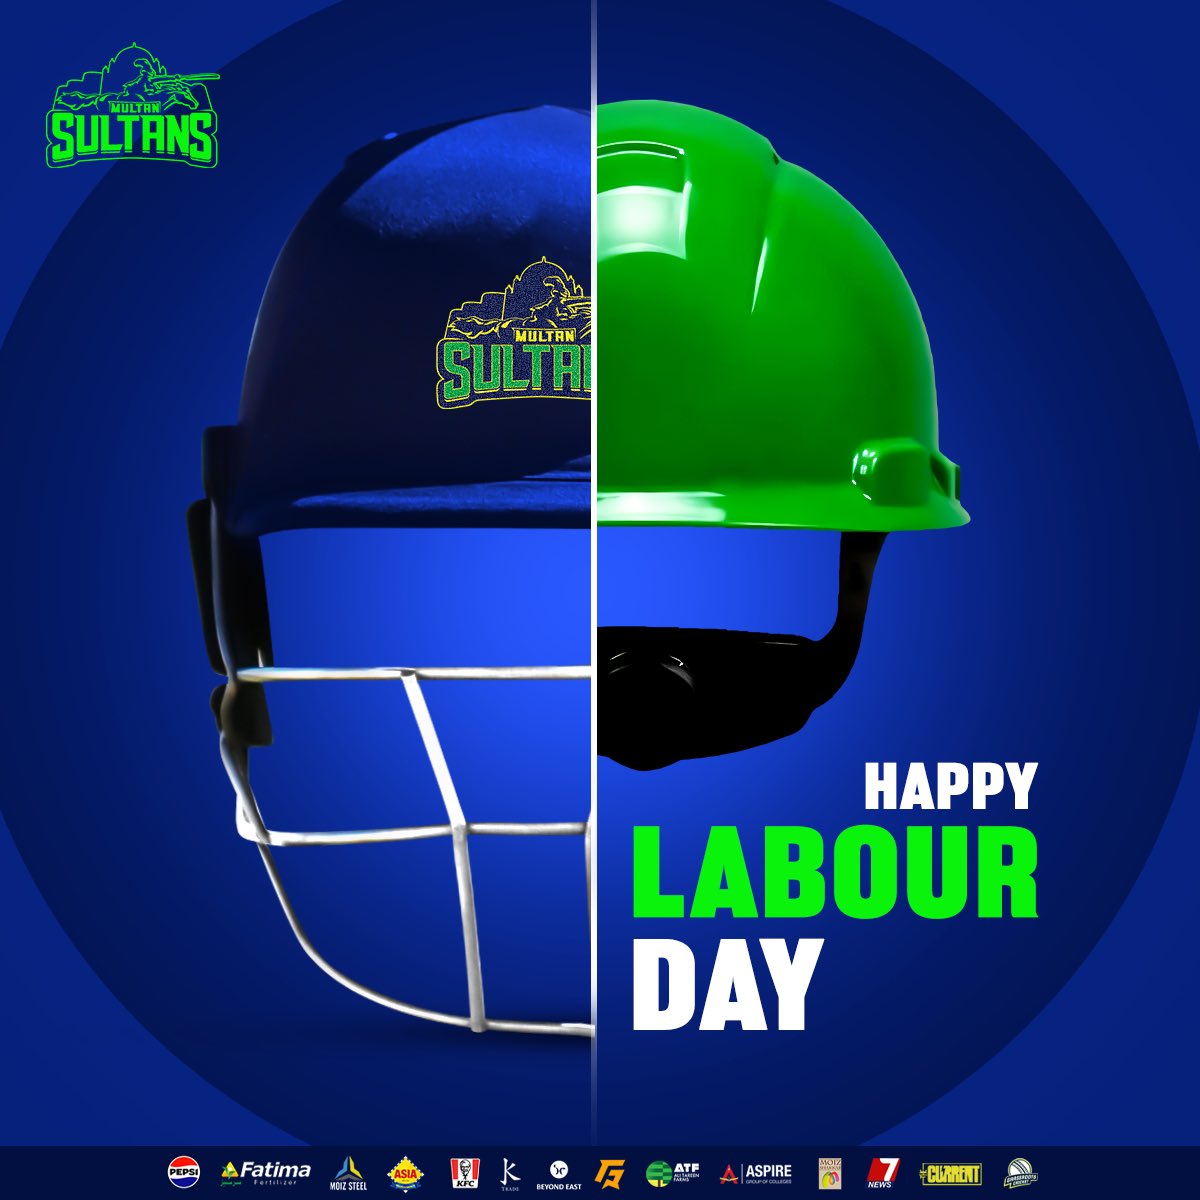 Honouring the people who make it happen every day with their hard work, dedication and resilience. Happy Labour Day! 🙌 #SultanSupremacy | #LabourDay